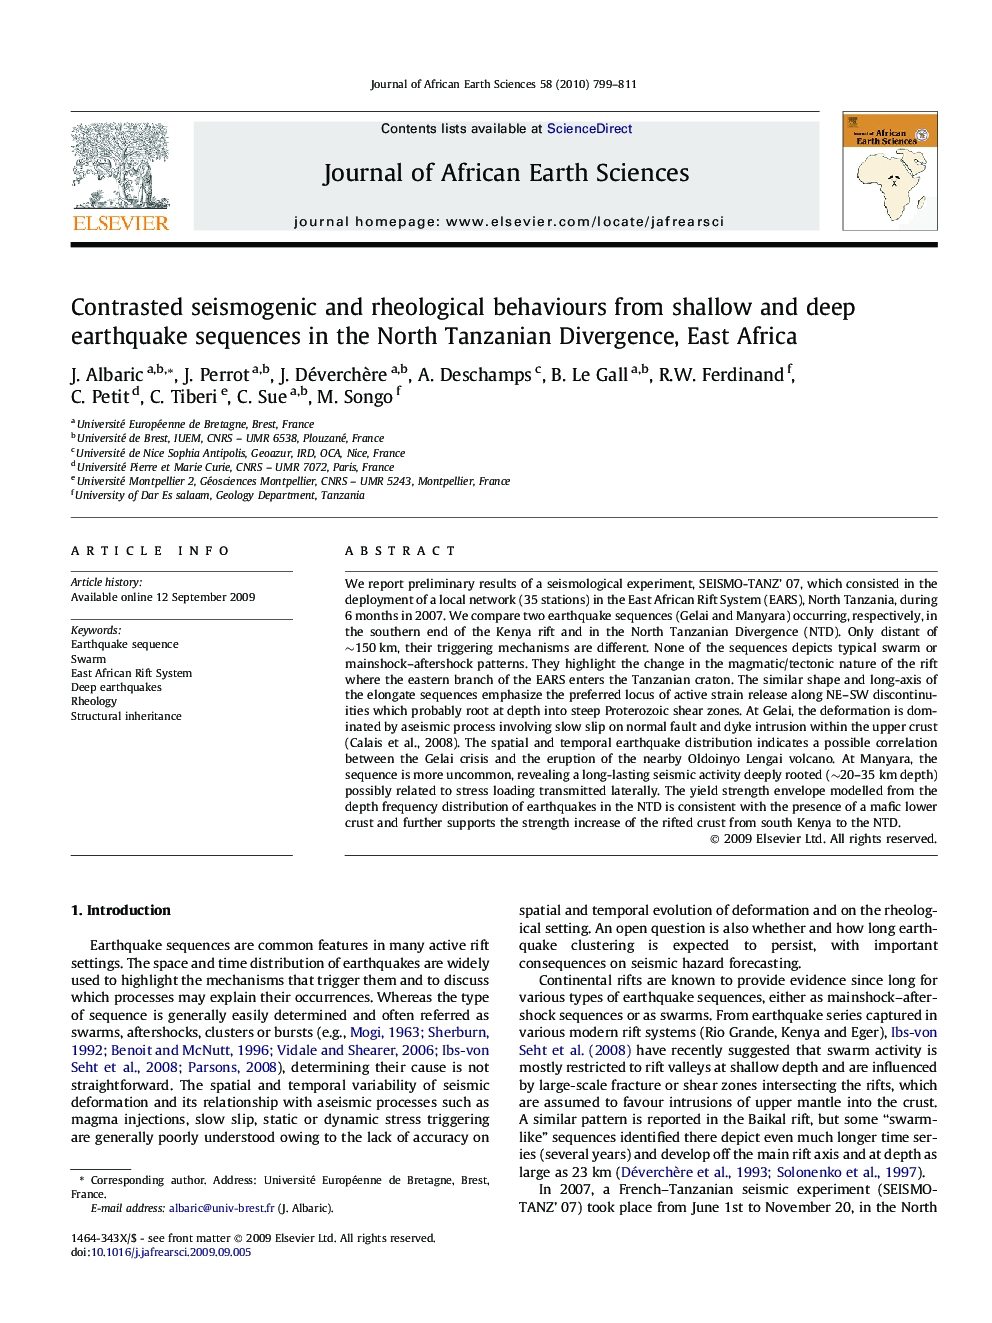 Contrasted seismogenic and rheological behaviours from shallow and deep earthquake sequences in the North Tanzanian Divergence, East Africa